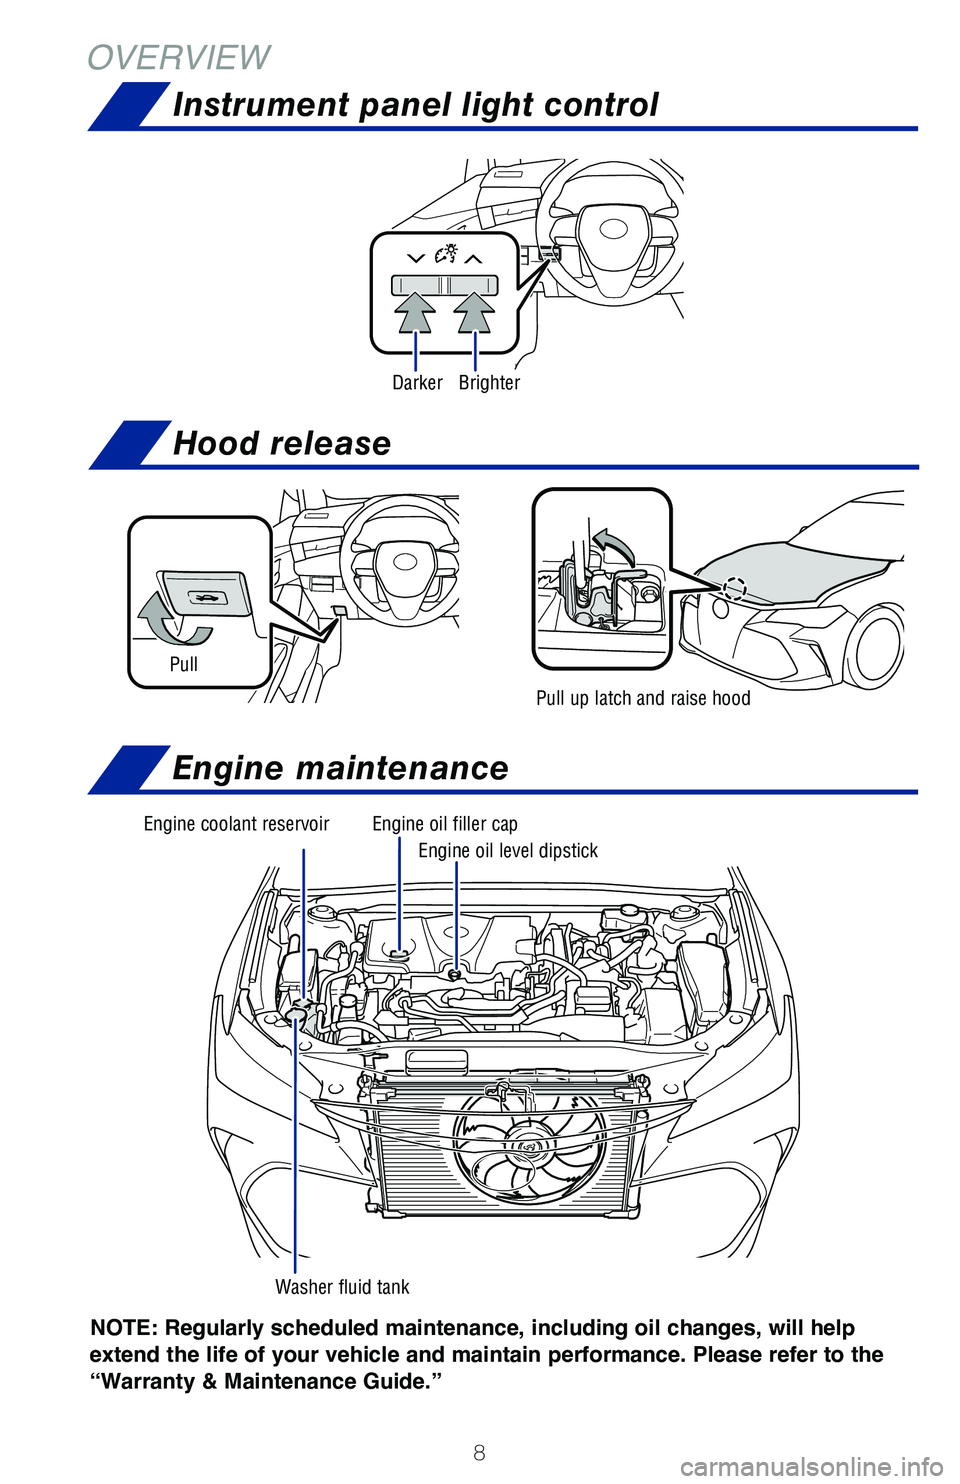 TOYOTA AVALON HYBRID 2021  Owners Manual (in English) 8
OVERVIEW
NOTE: Regularly scheduled maintenance, including  oil changes, will help 
extend the life of  your vehicle and maintain performance. Please refer to the 
“Warranty & Maintenance Guide.”